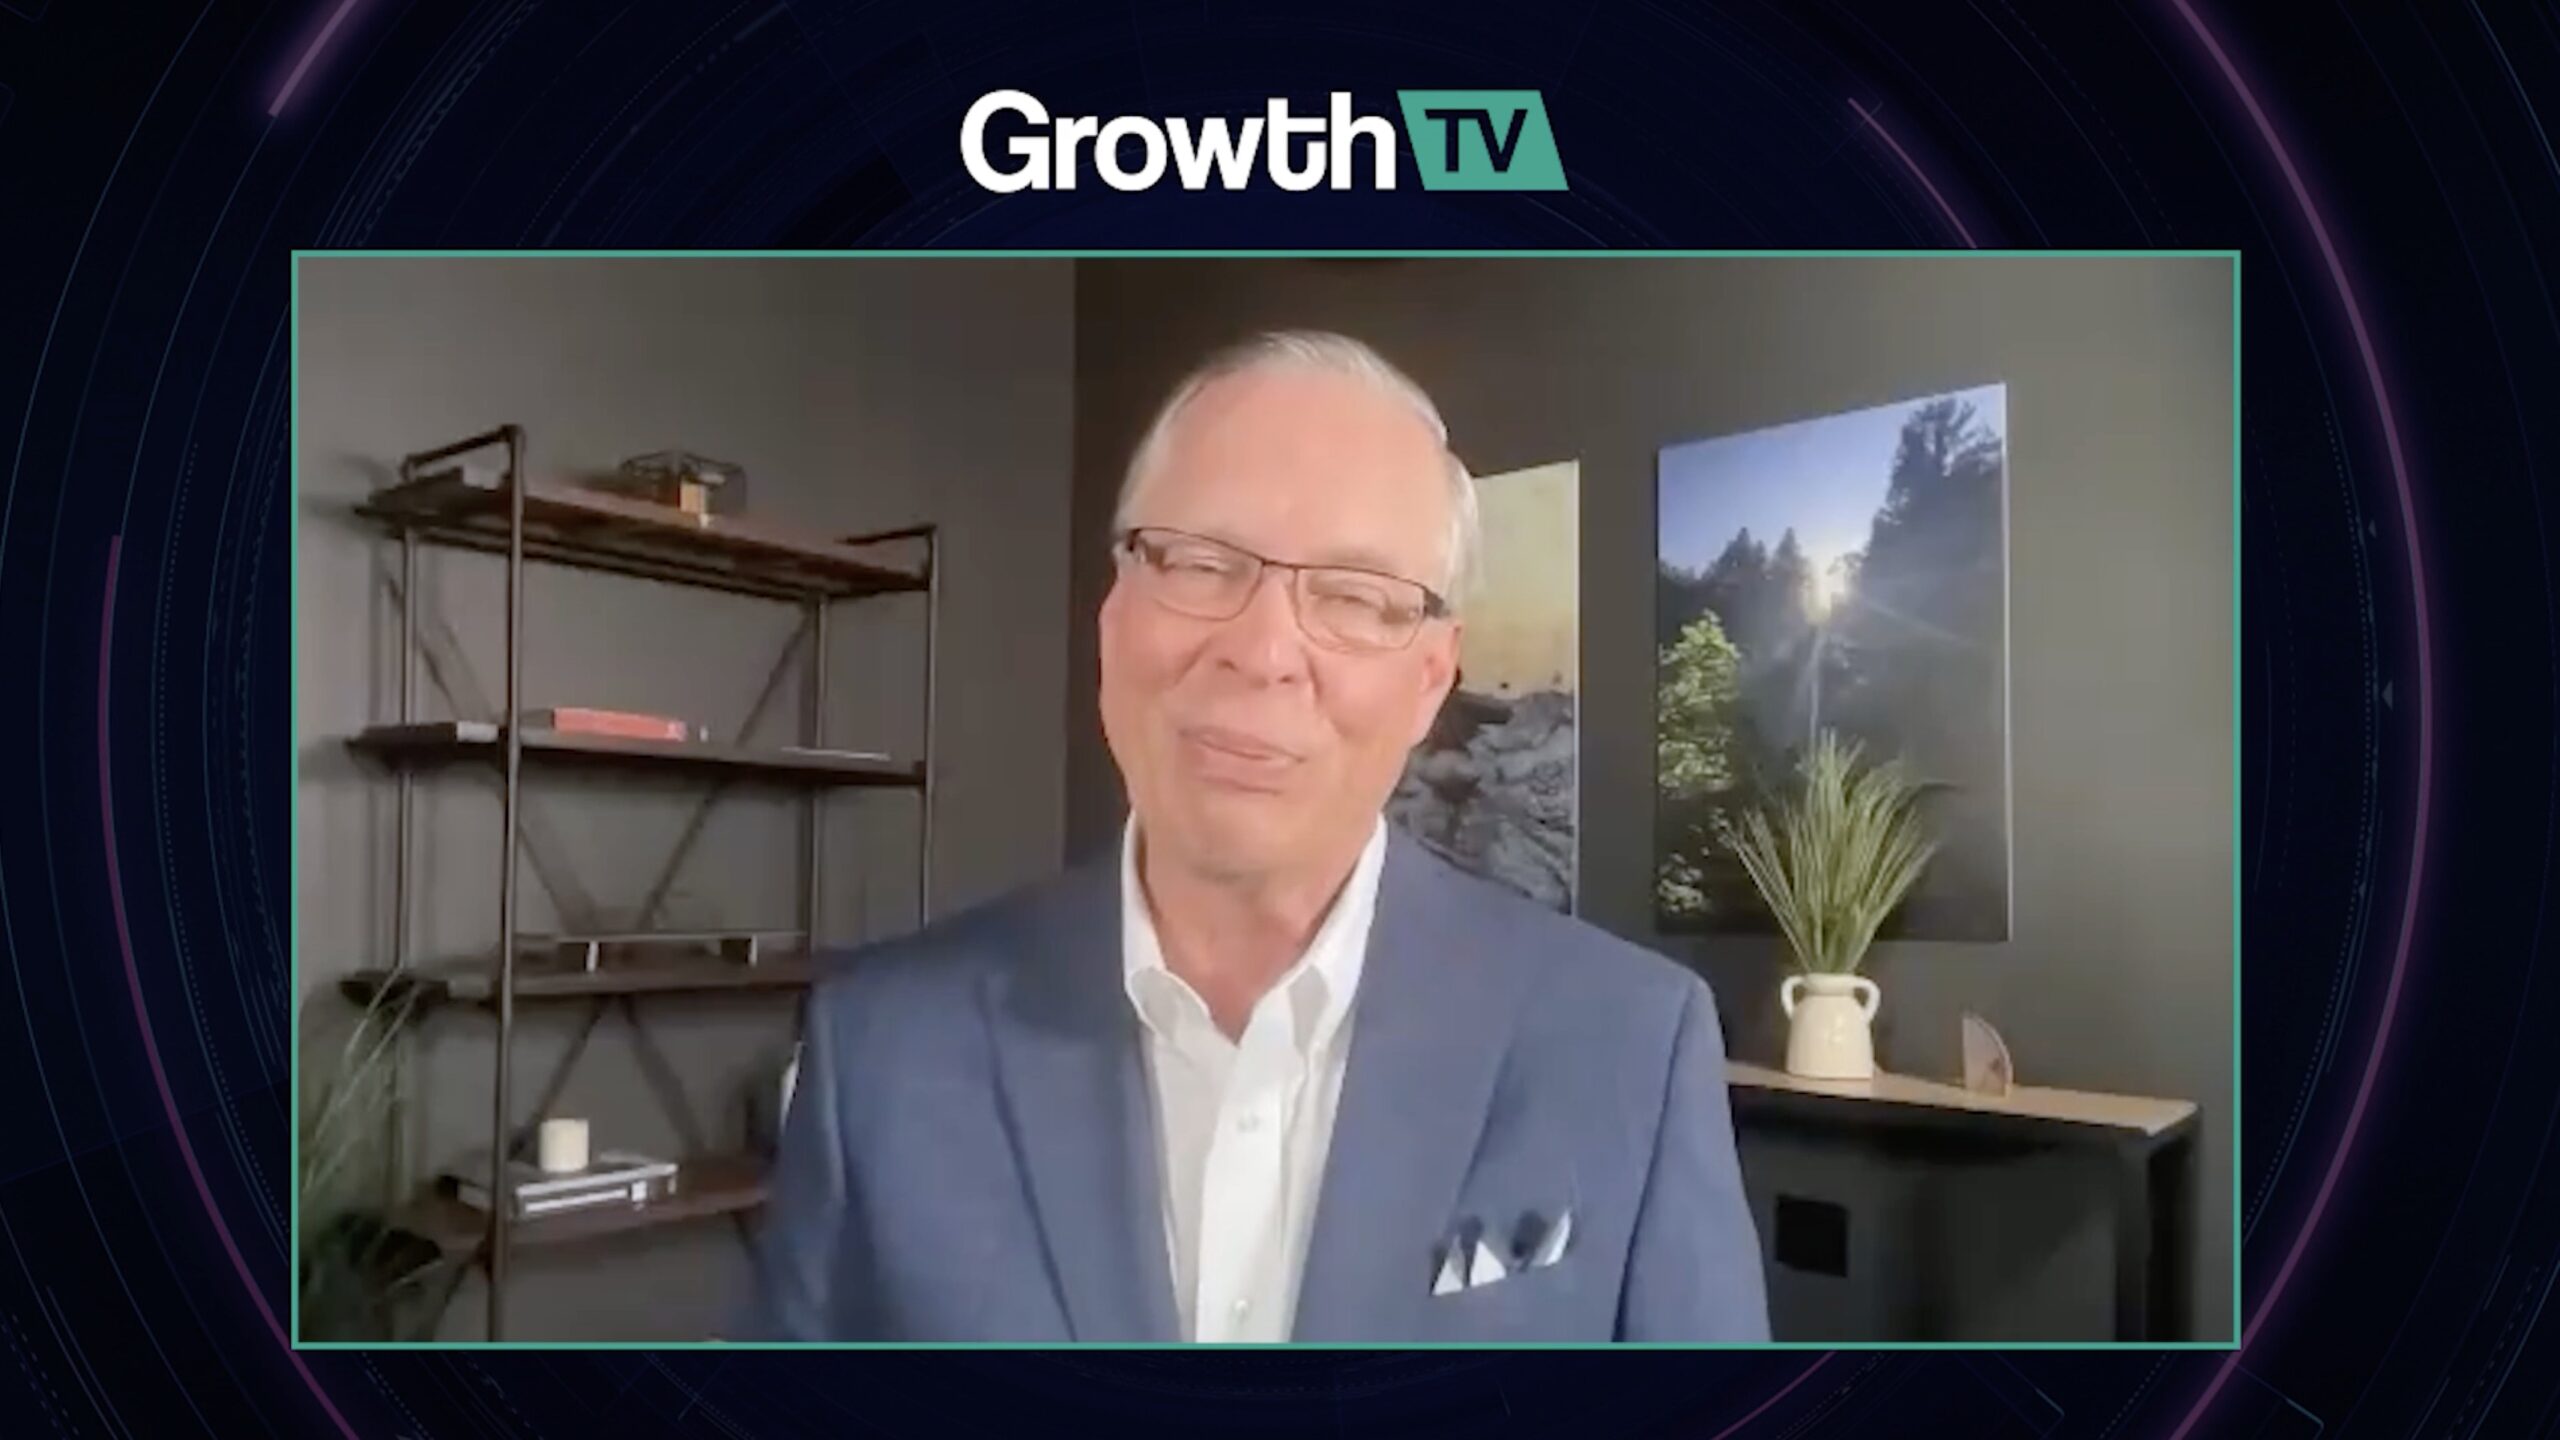 growthtv-ceo-brent-baxter